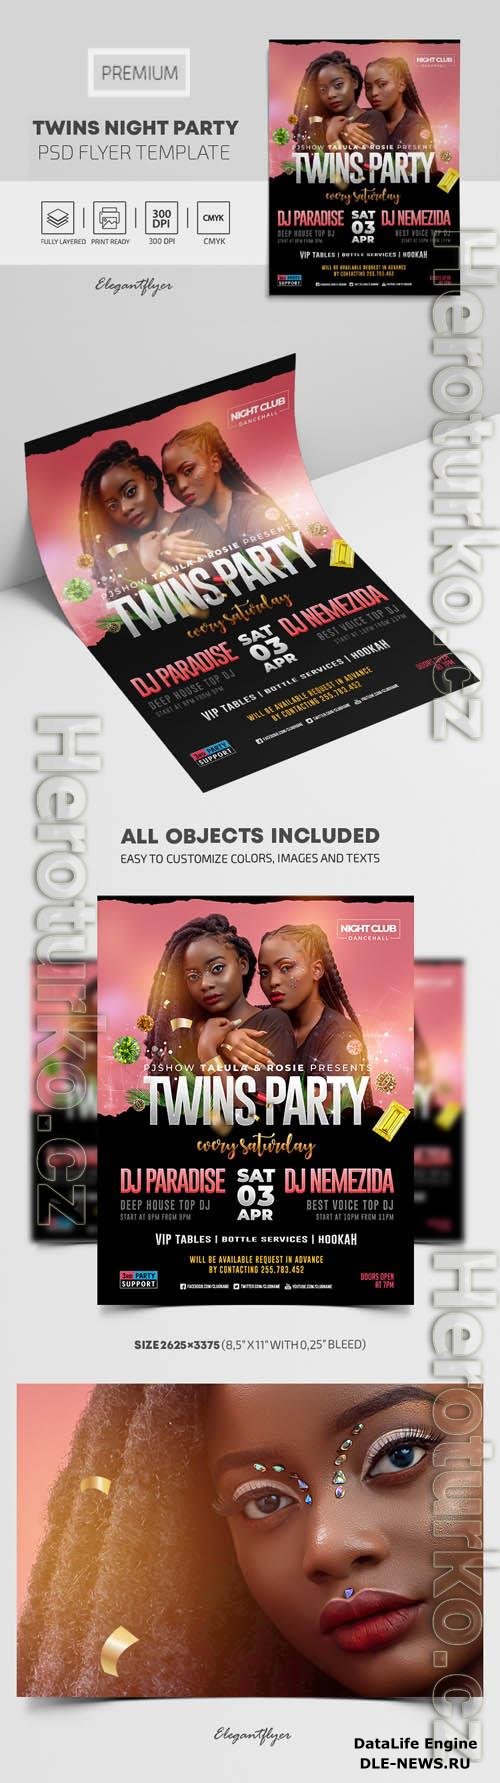 Twins Night Party Premium PSD Flyer Template